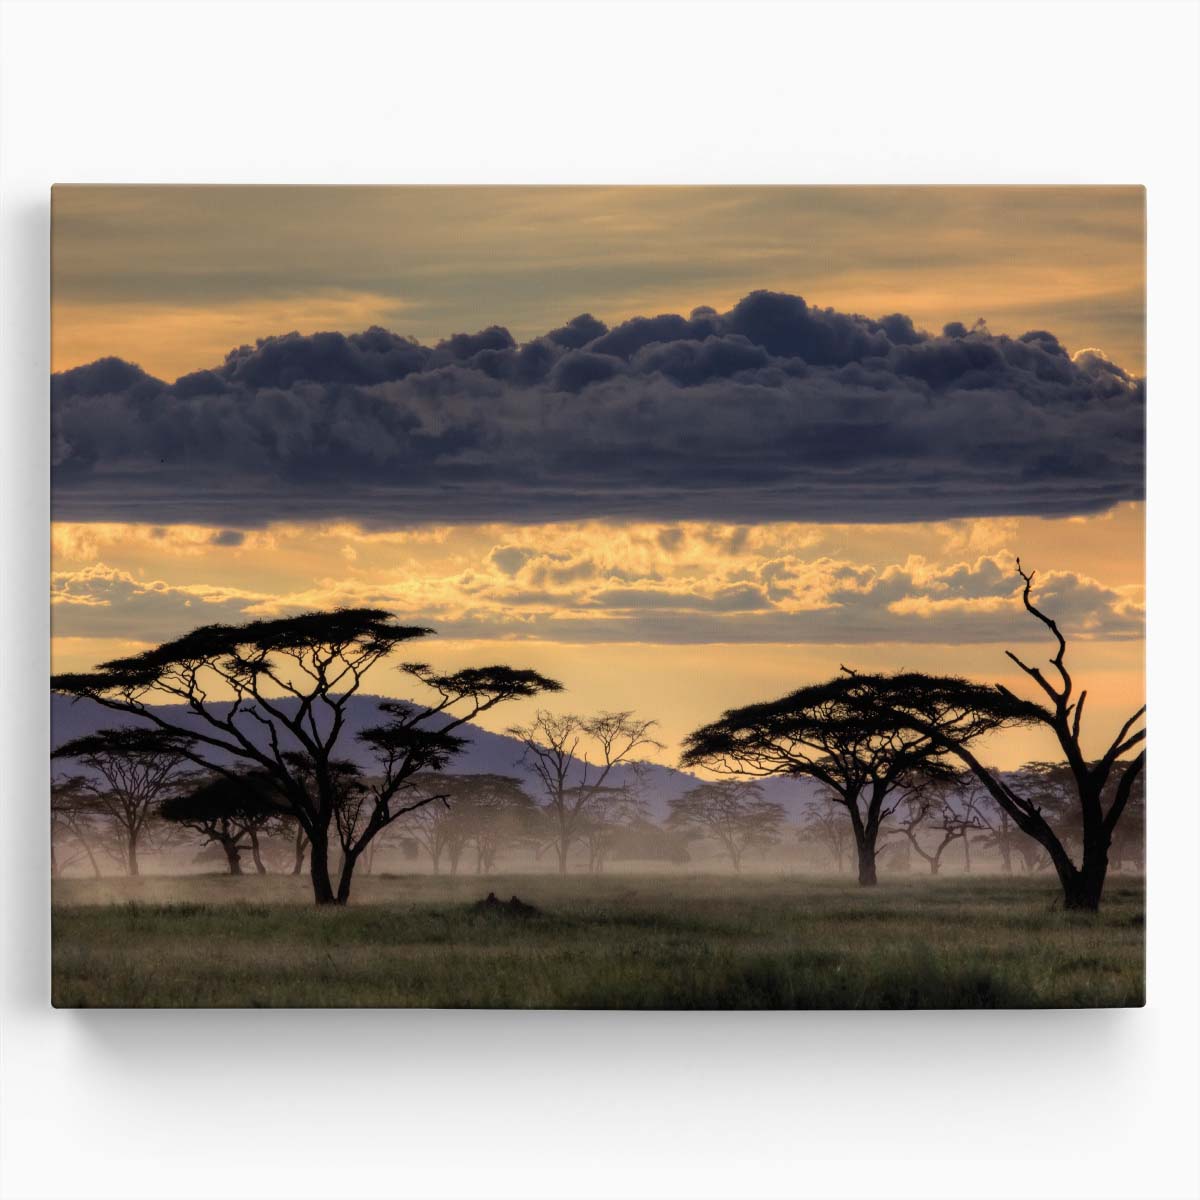 Tanzania Savannah Sunset & Misty Trees Wall Art by Luxuriance Designs. Made in USA.